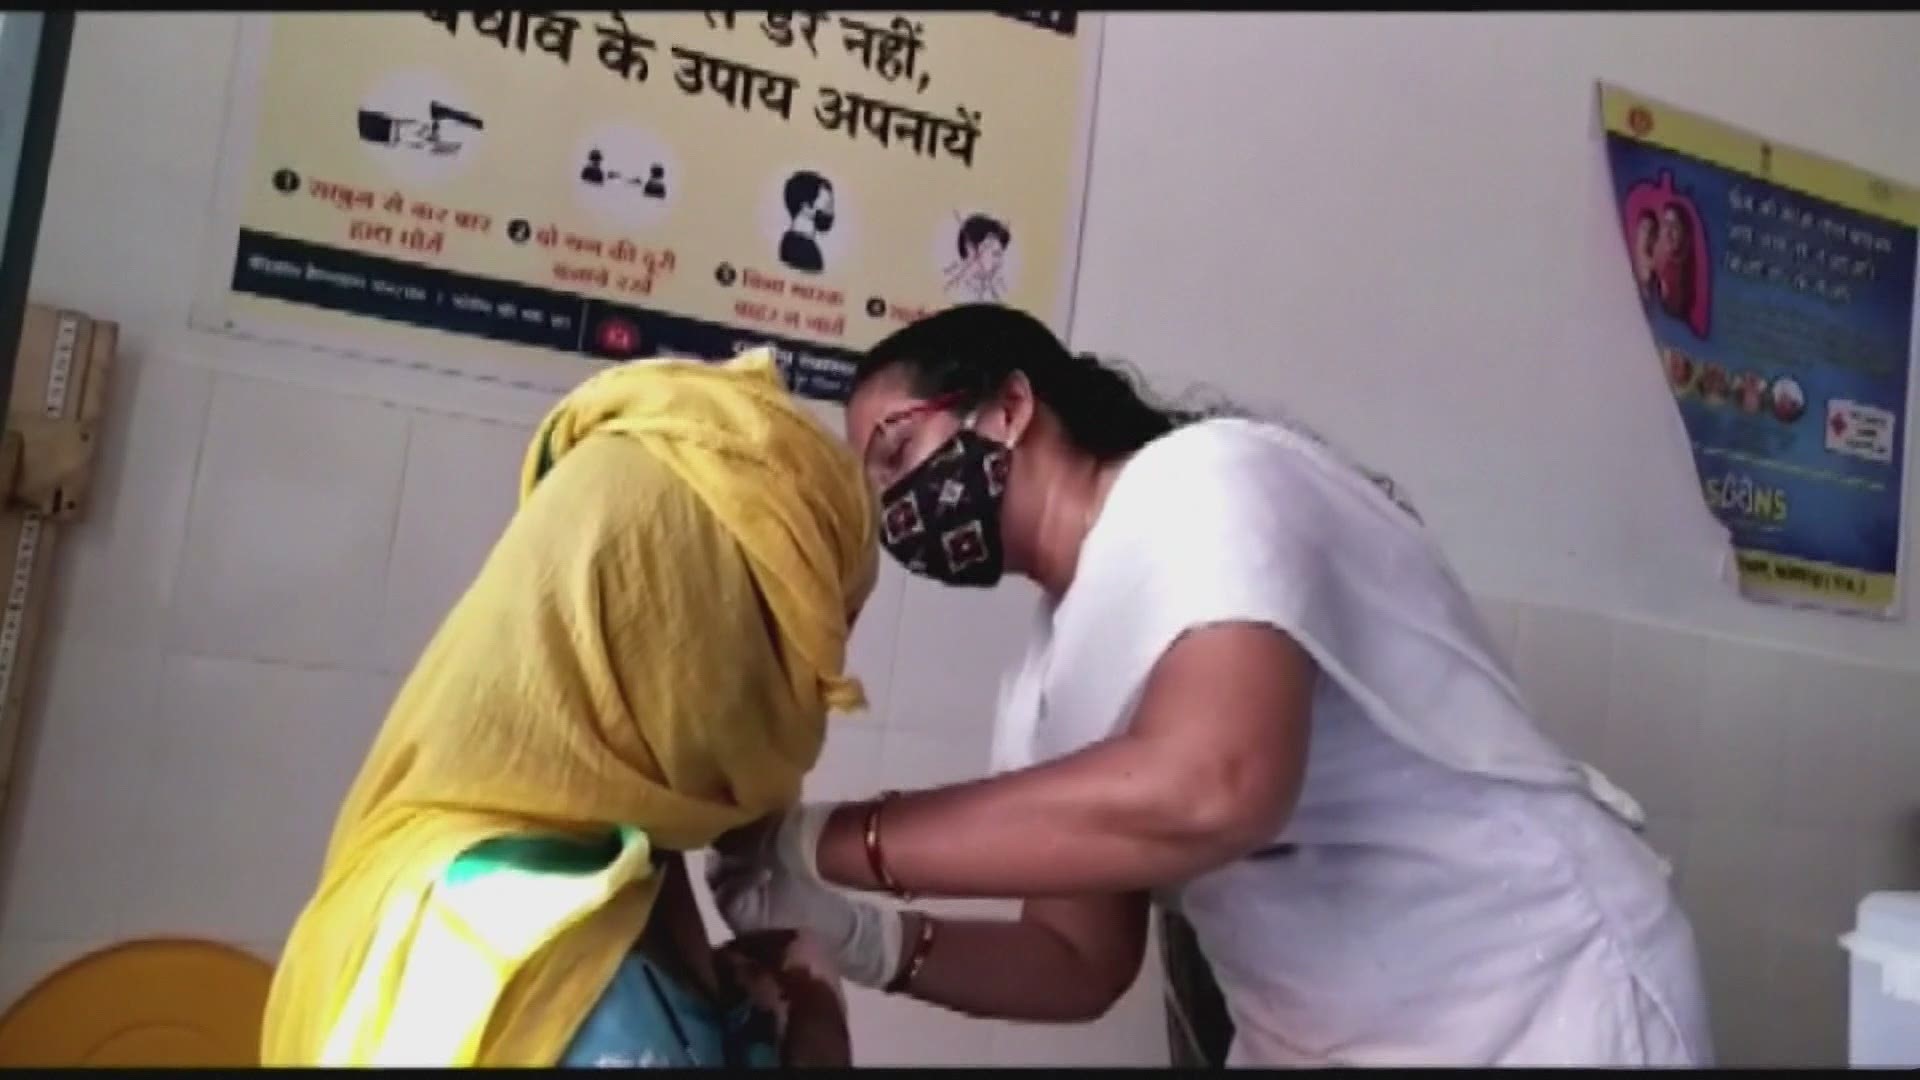 During a surge of coronavirus cases in India, families in Washington state are struggling to find ways to help their loved ones.